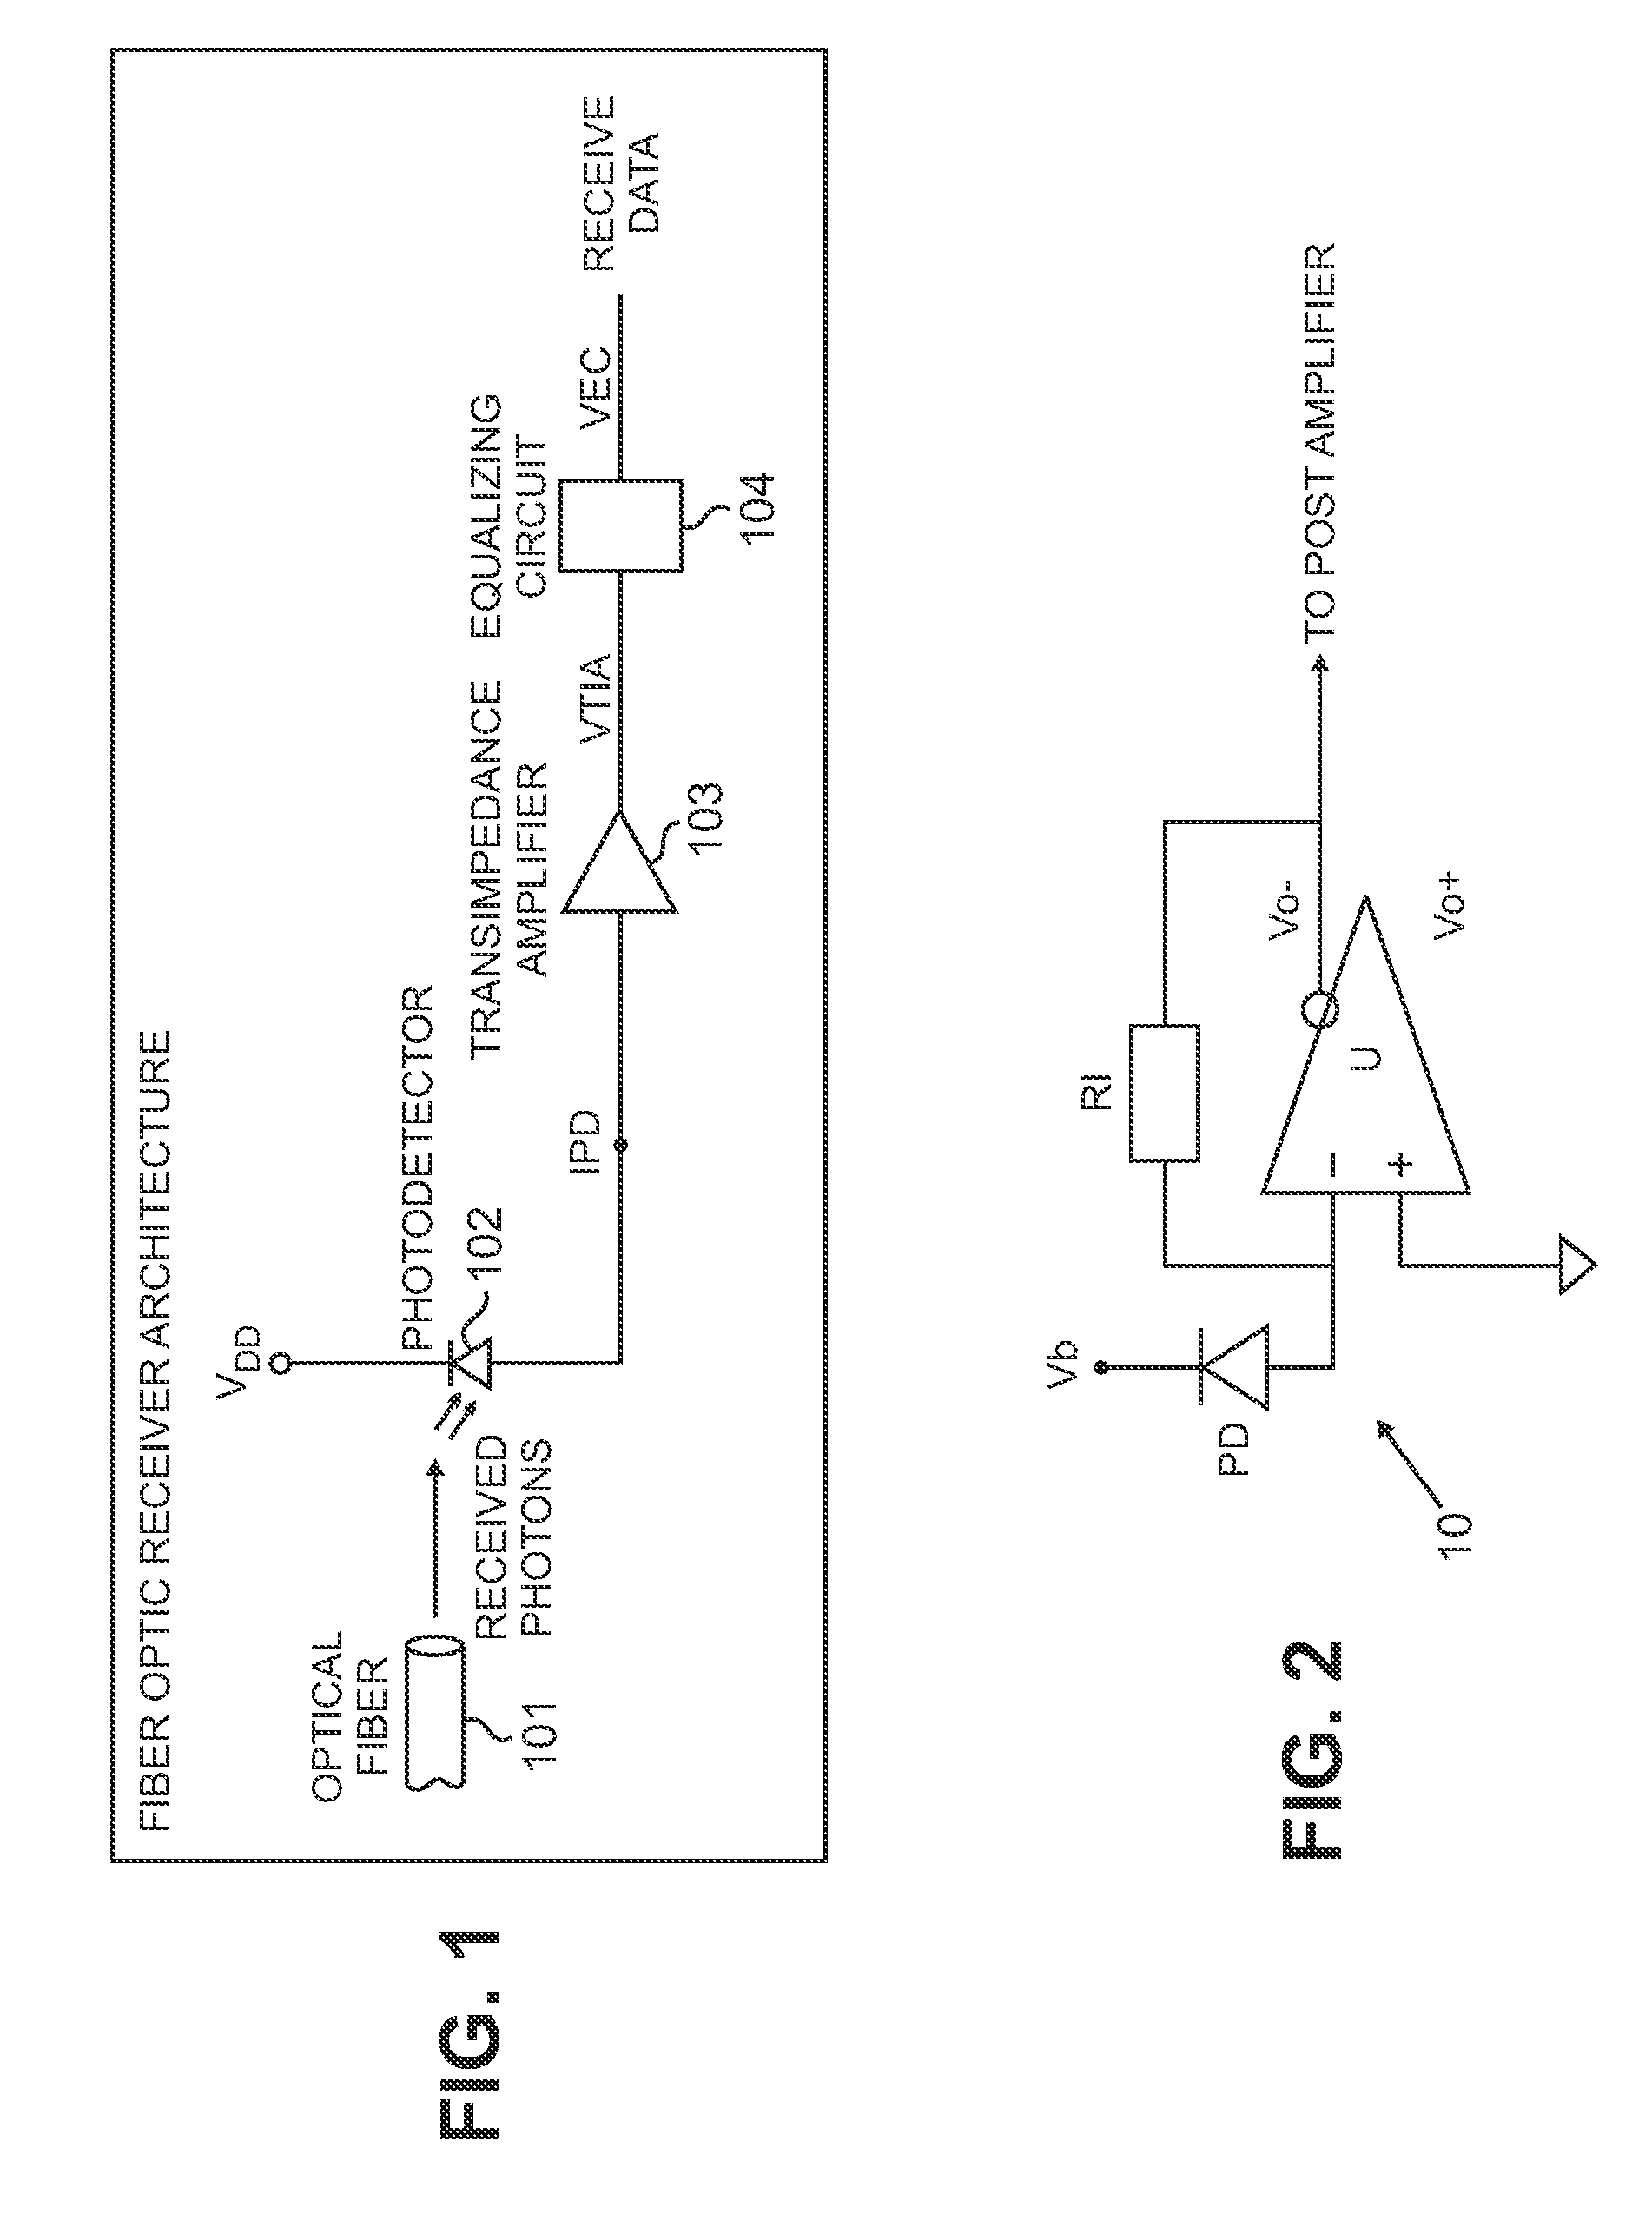 High Sensitivity Optical Receiver Employing a High Gain Amplifier and an Equalizing Circuit